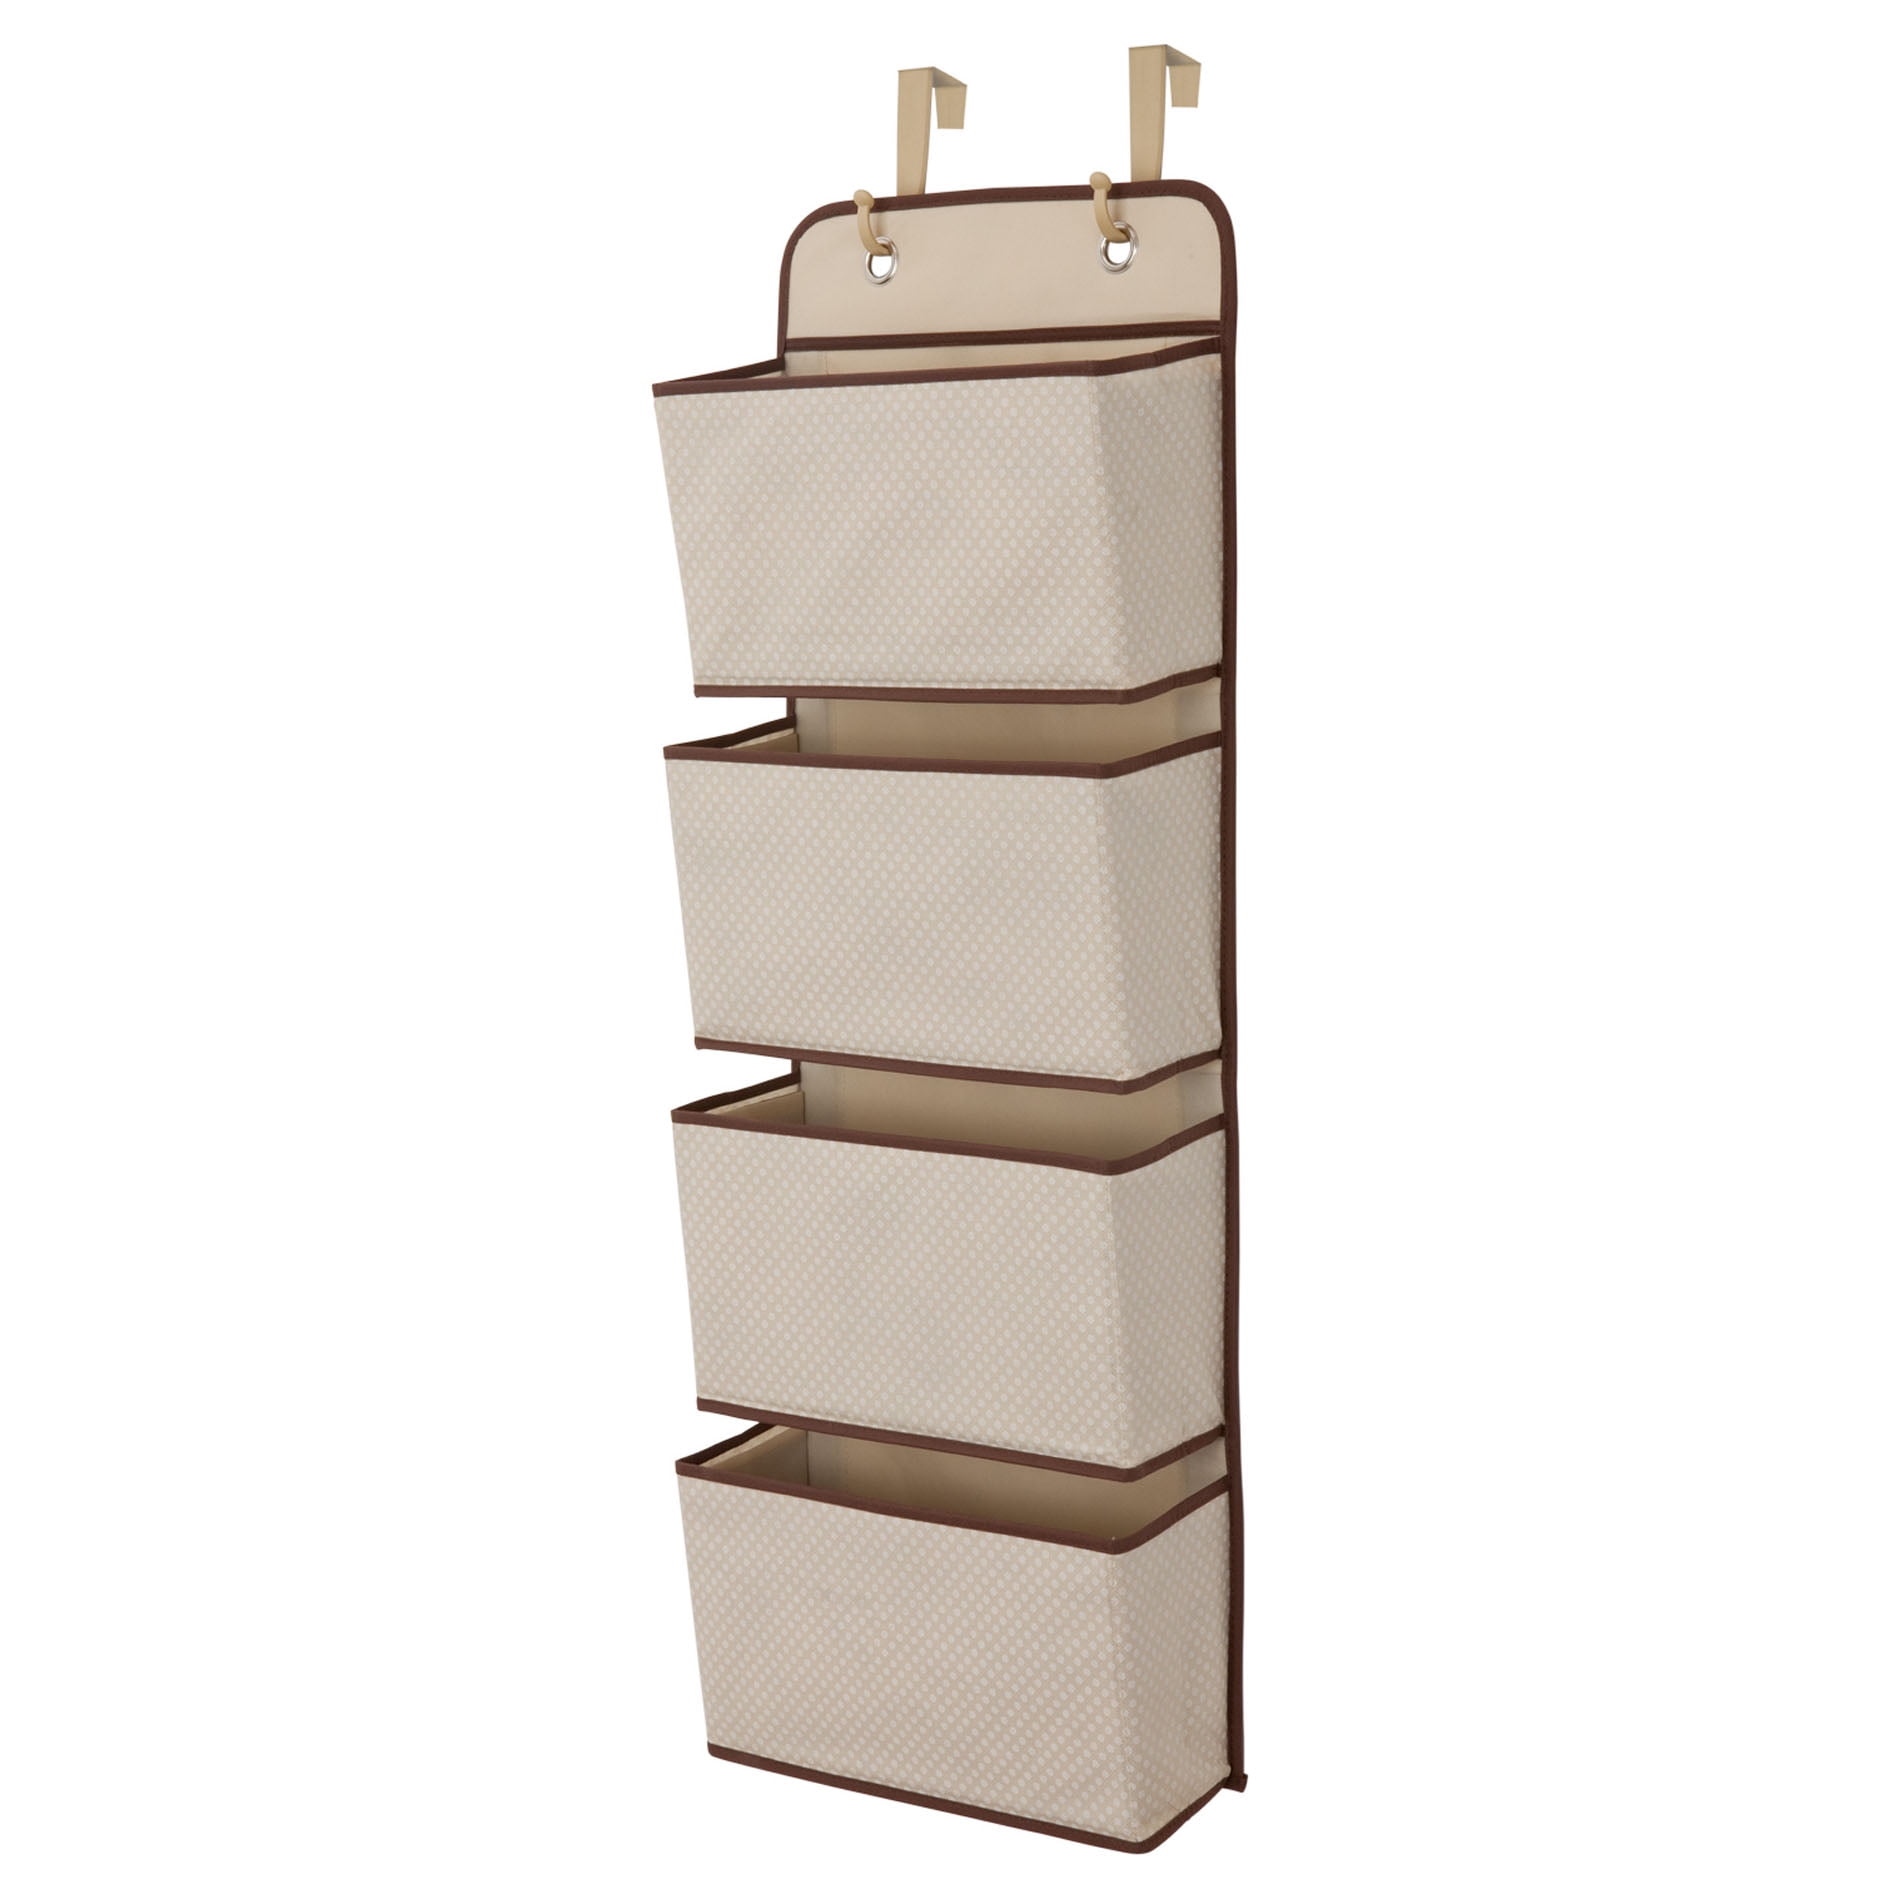 Beige DonYeco Over The Door Hanging Wall Organizer Oxford Cloth Fabric Wall Mount Hanging Storage Organization 3 Hook Loops Closures and 7 Pockets Storage for Pantry Kitchen Bathroom Nursery Dorm